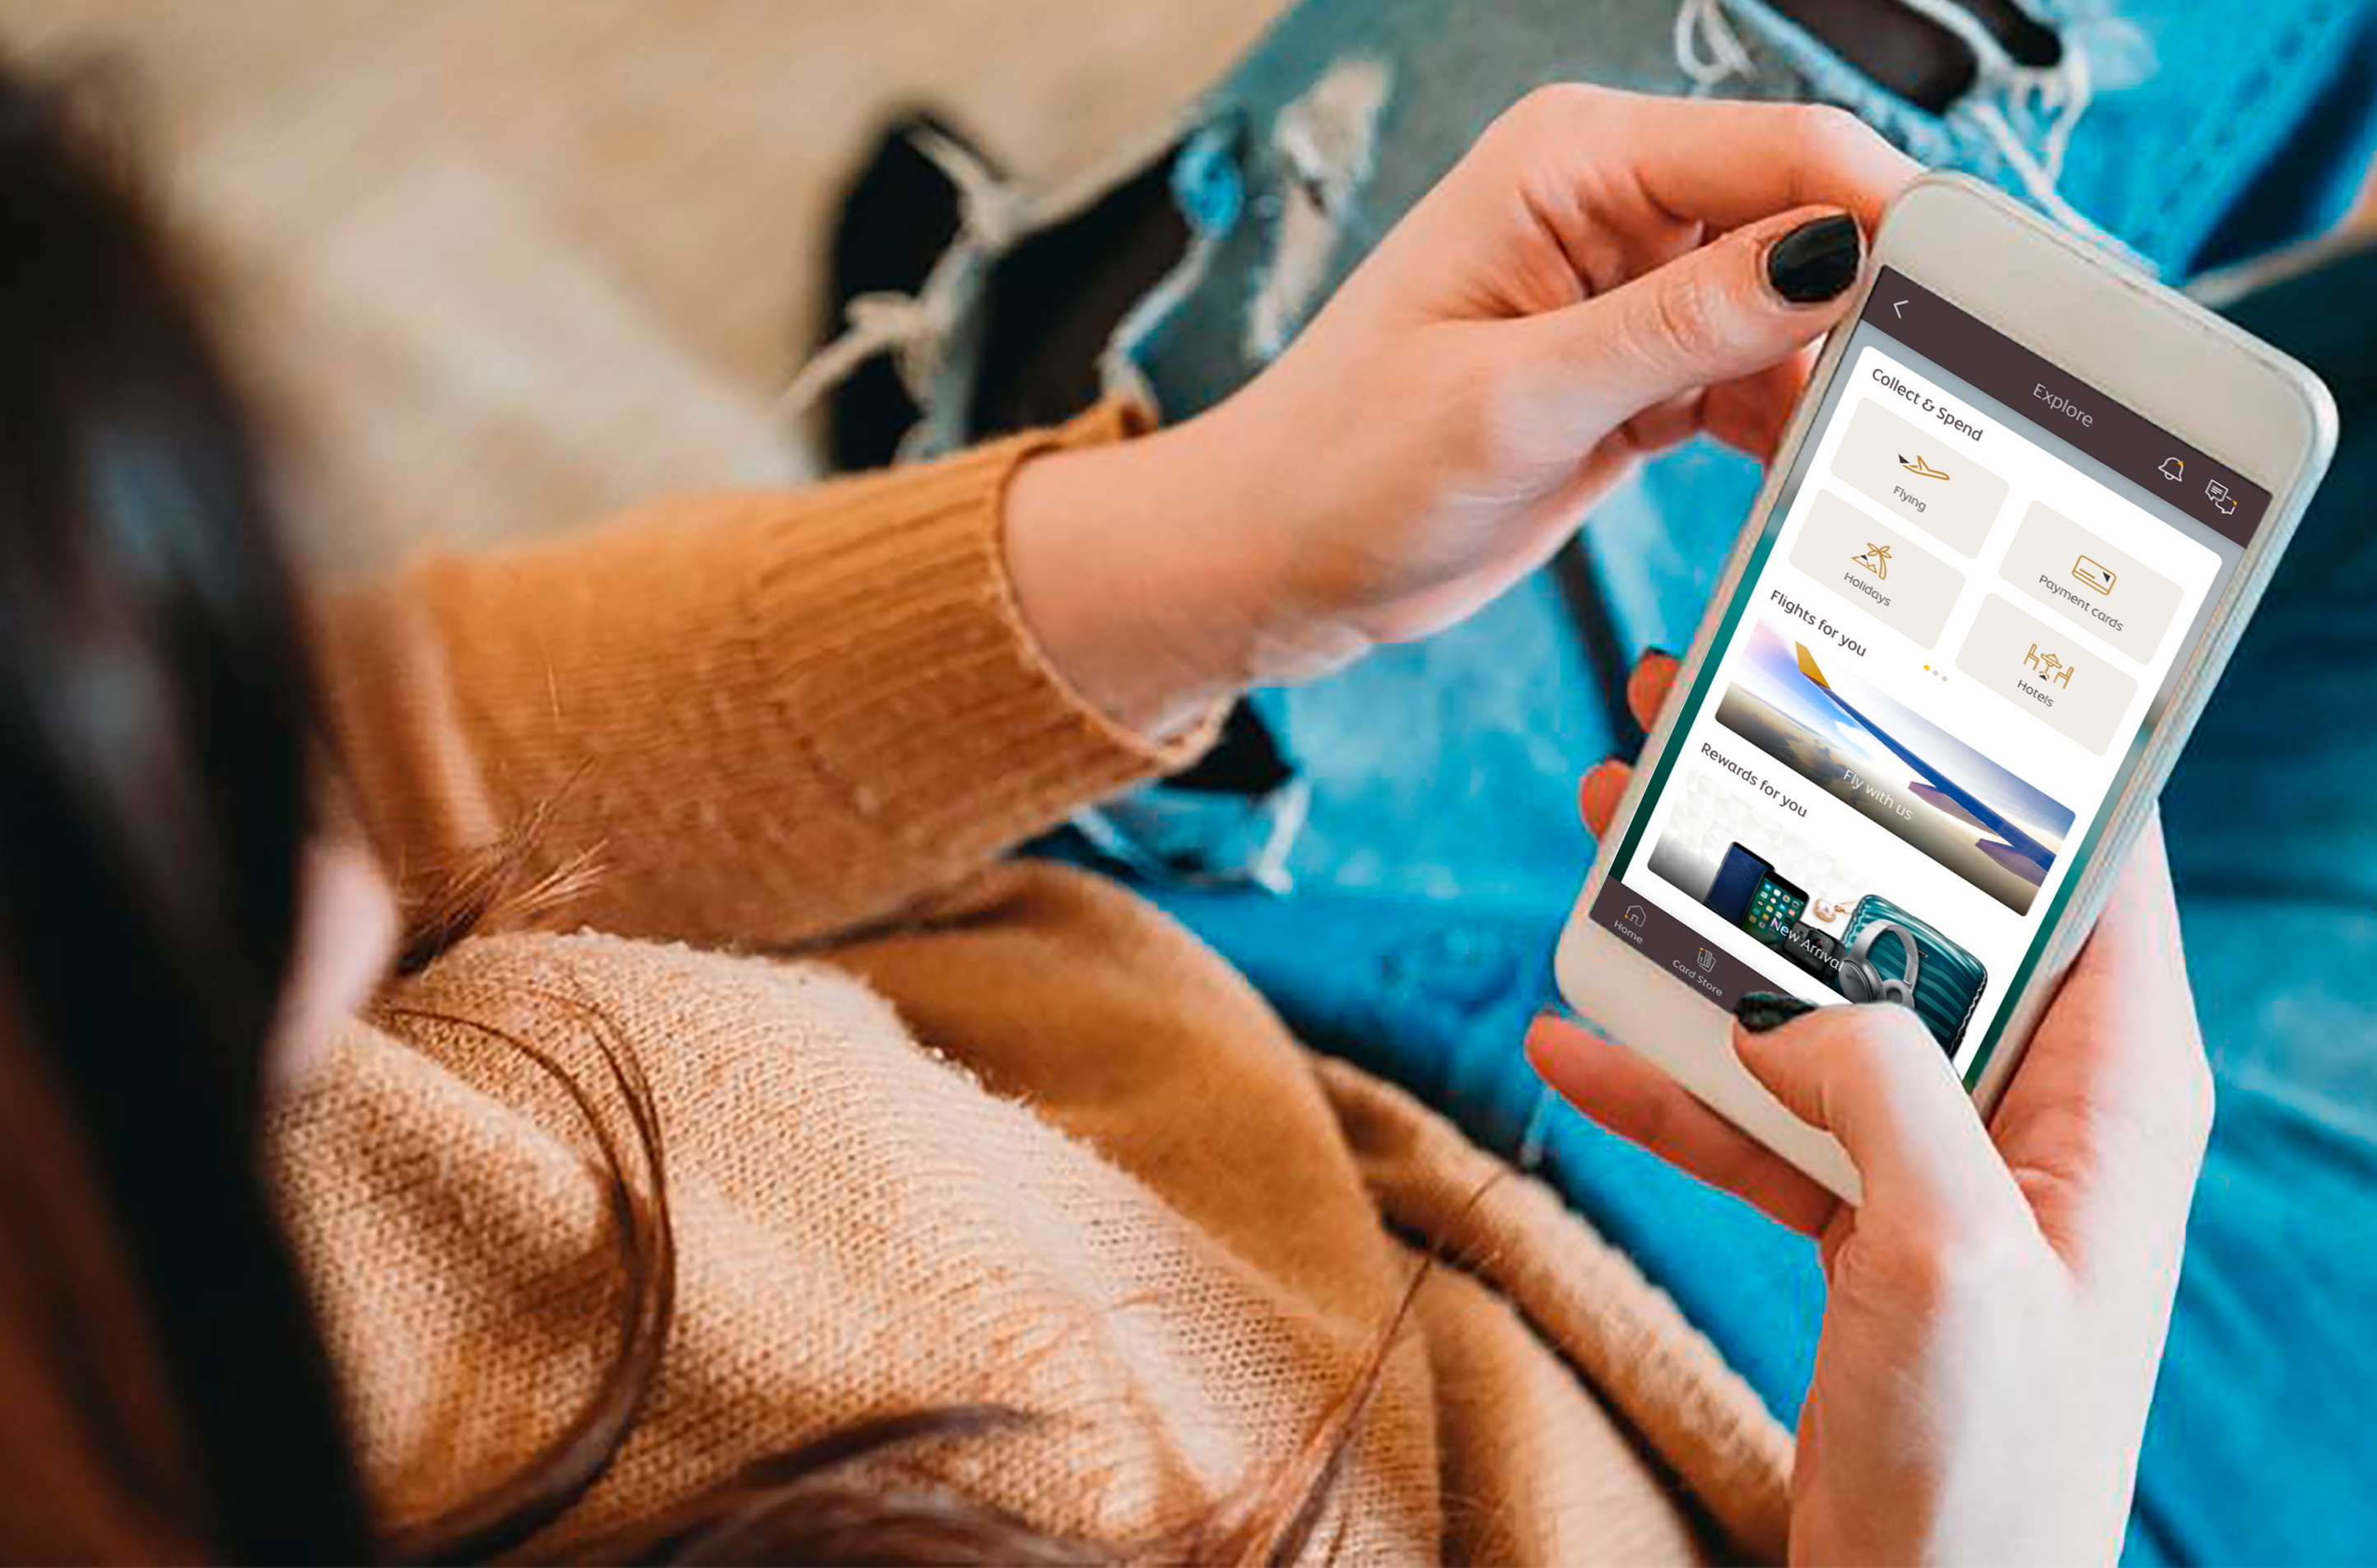 Etihad Guest has upgraded its mobile application so that UAE-based members can spend their miles seamlessly at selected malls in Abu Dhabi and Al Ain. Click to enlarge.